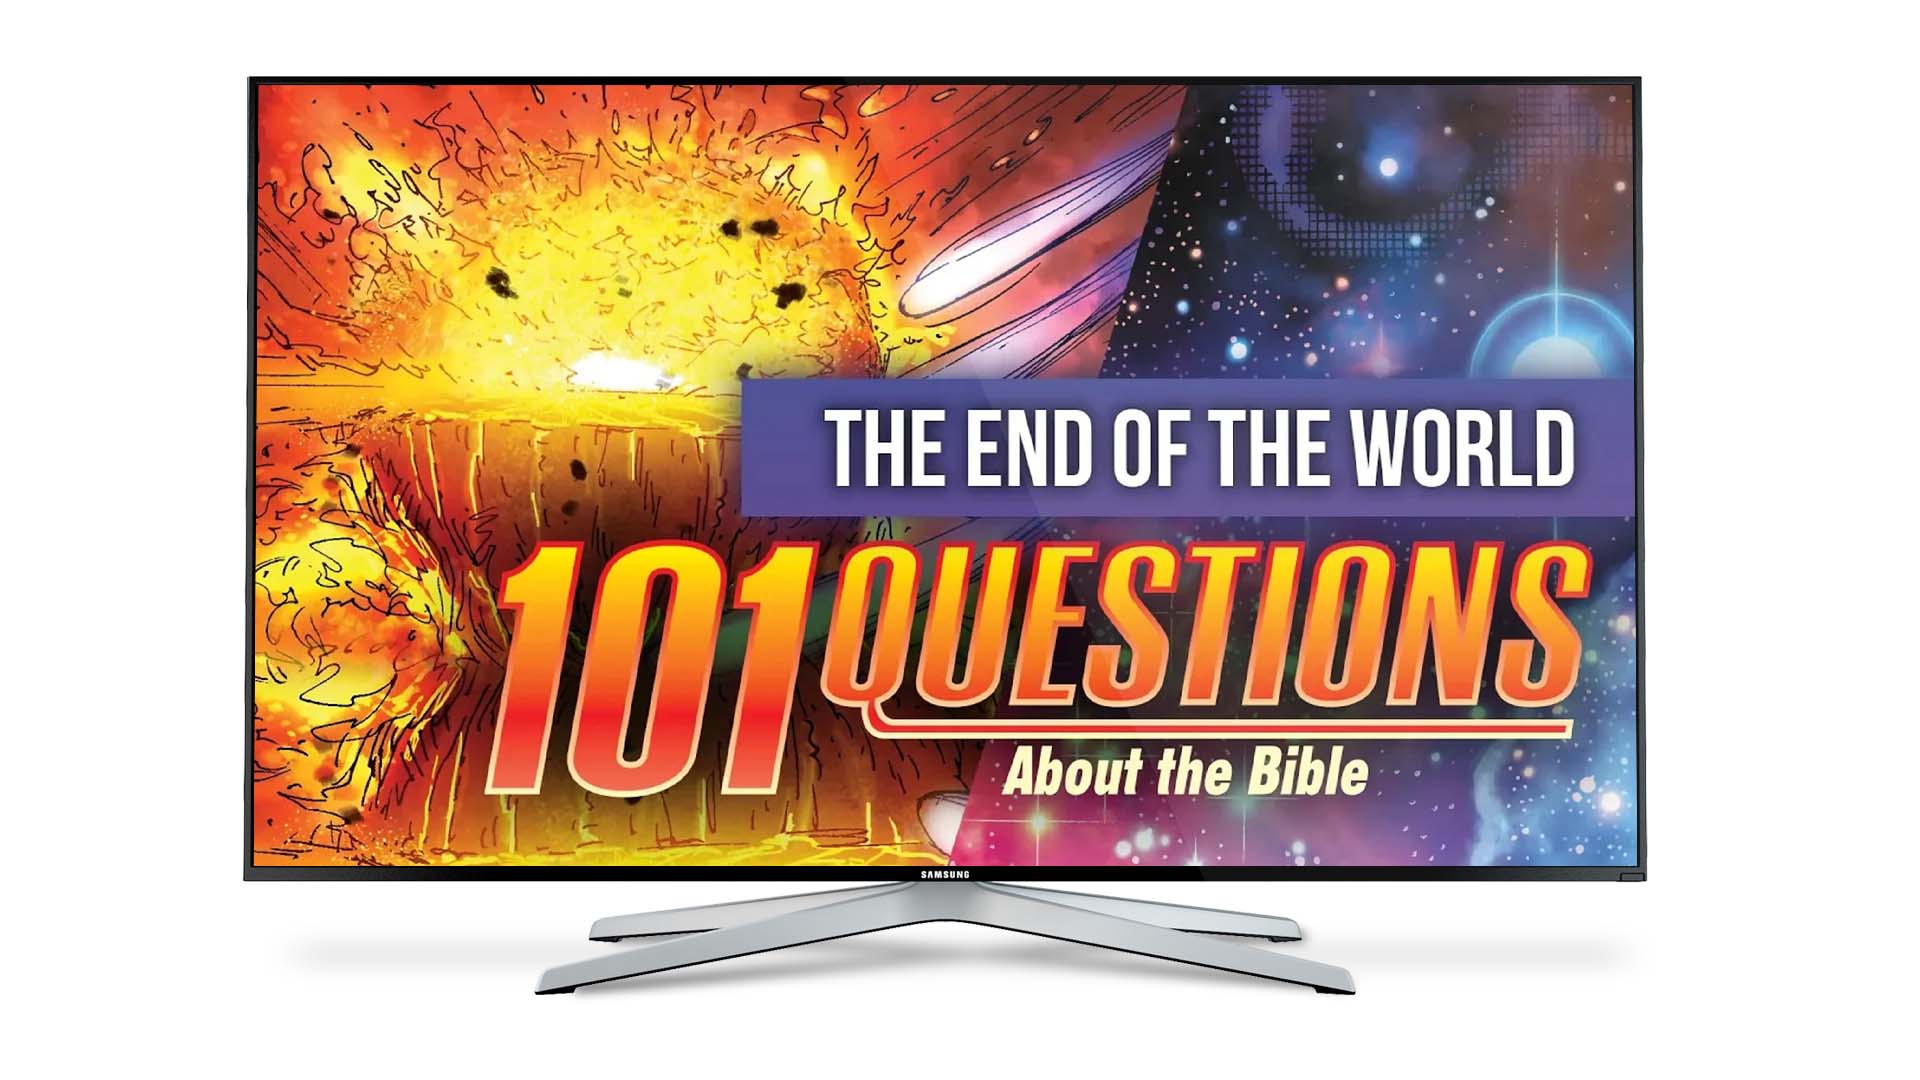 Motion Comic: 101 Questions #18 - What does the Bible say about the end of the world?